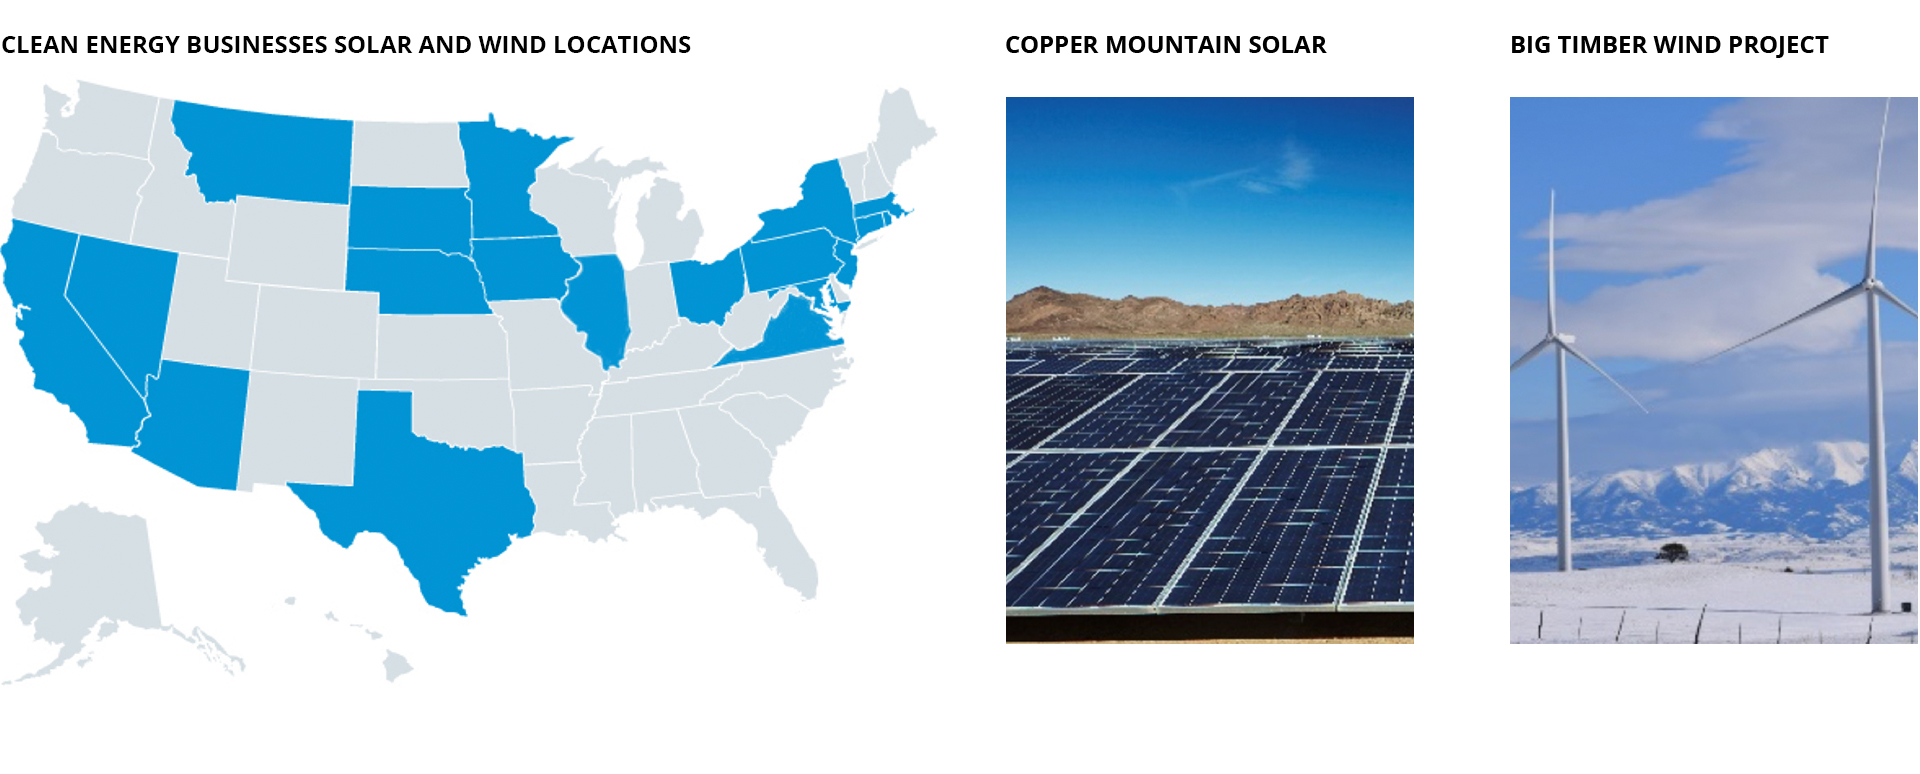 Clean Energy Businesses Solar and Wind Locations; Copper Mountain Solar; Big Timber Wind Project